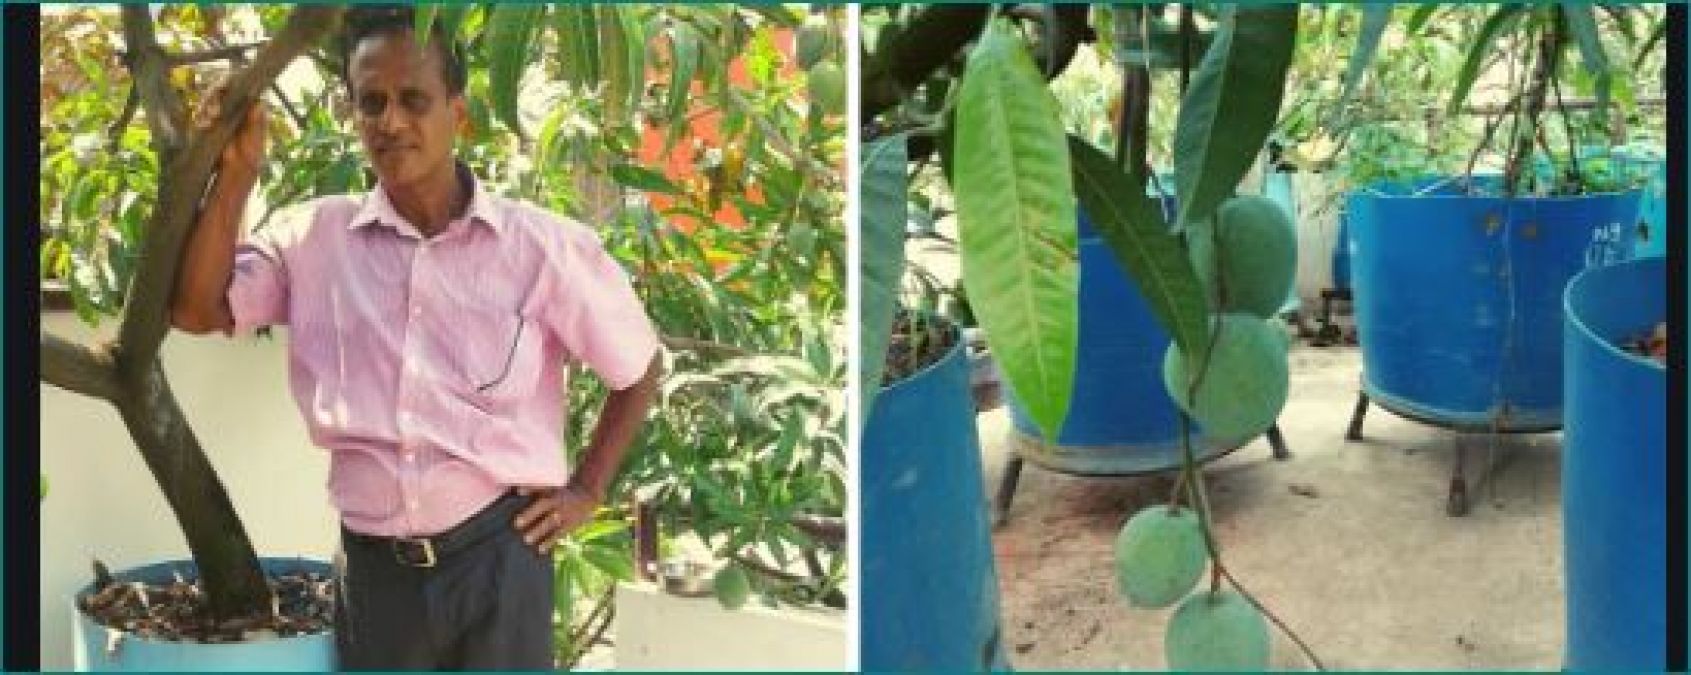 This young man grows over 40 varieties of mangoes on his roof